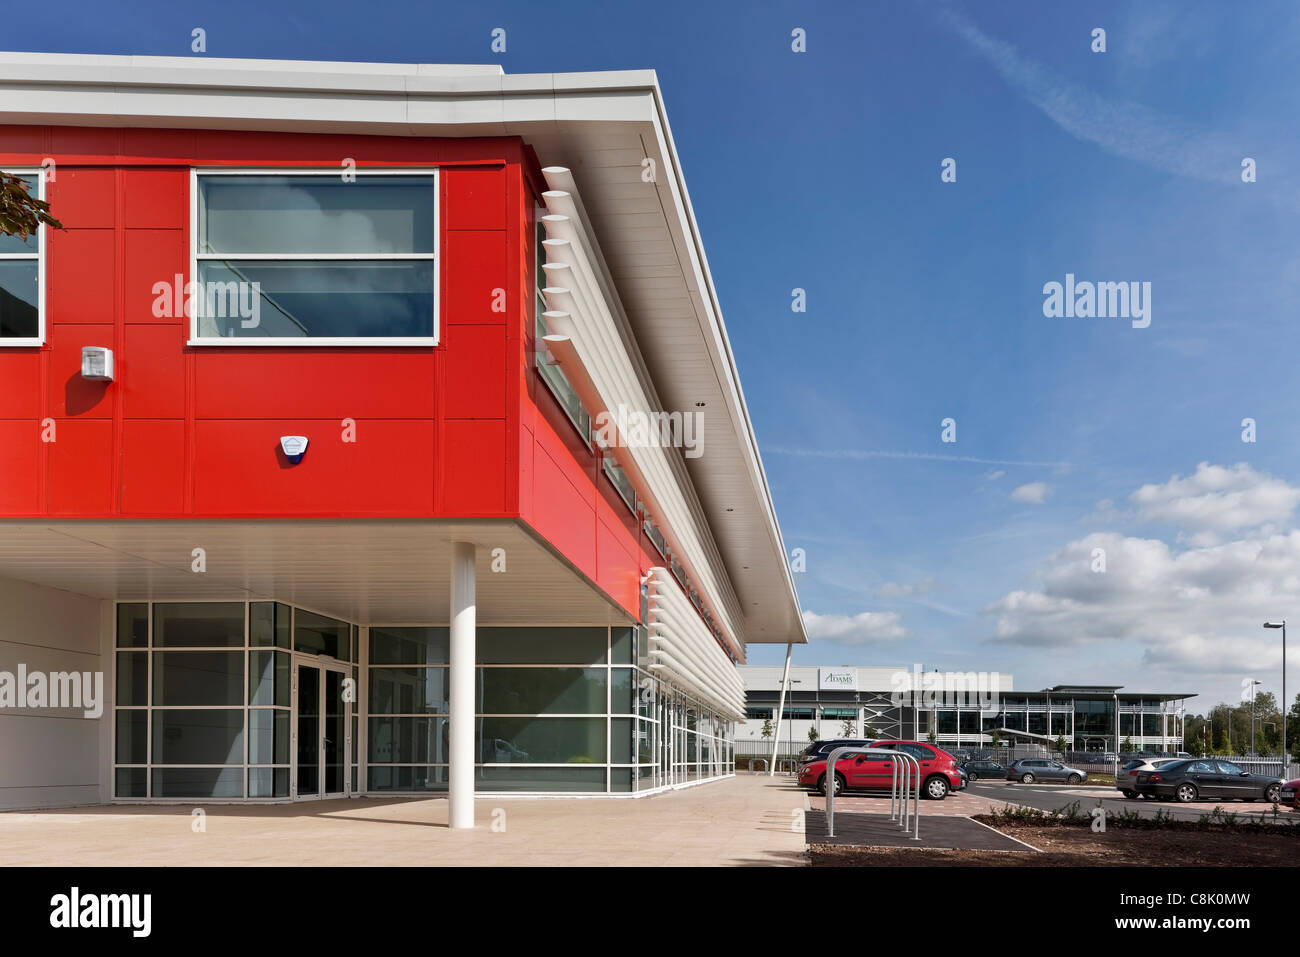 Adams Foods factory and offices in Leek, Staffordshire. Stock Photo